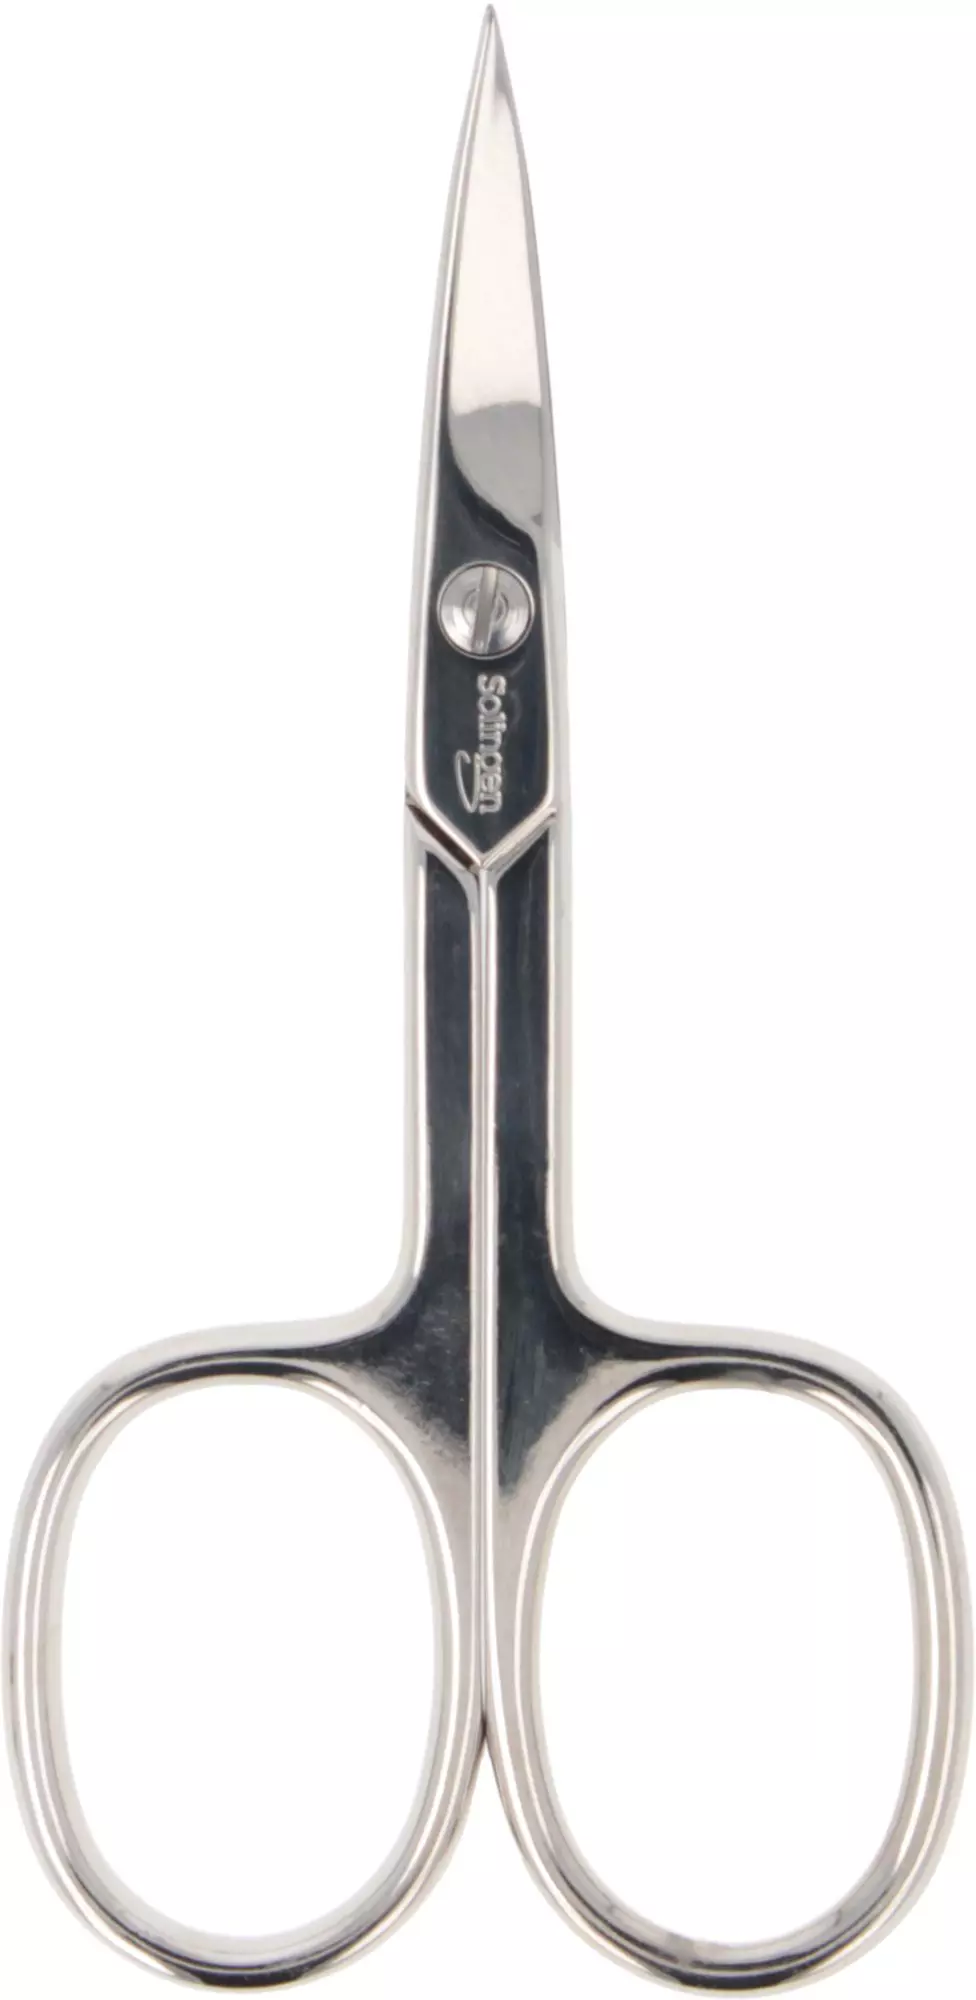 Parsa Beauty Scissor With Curved Cutting